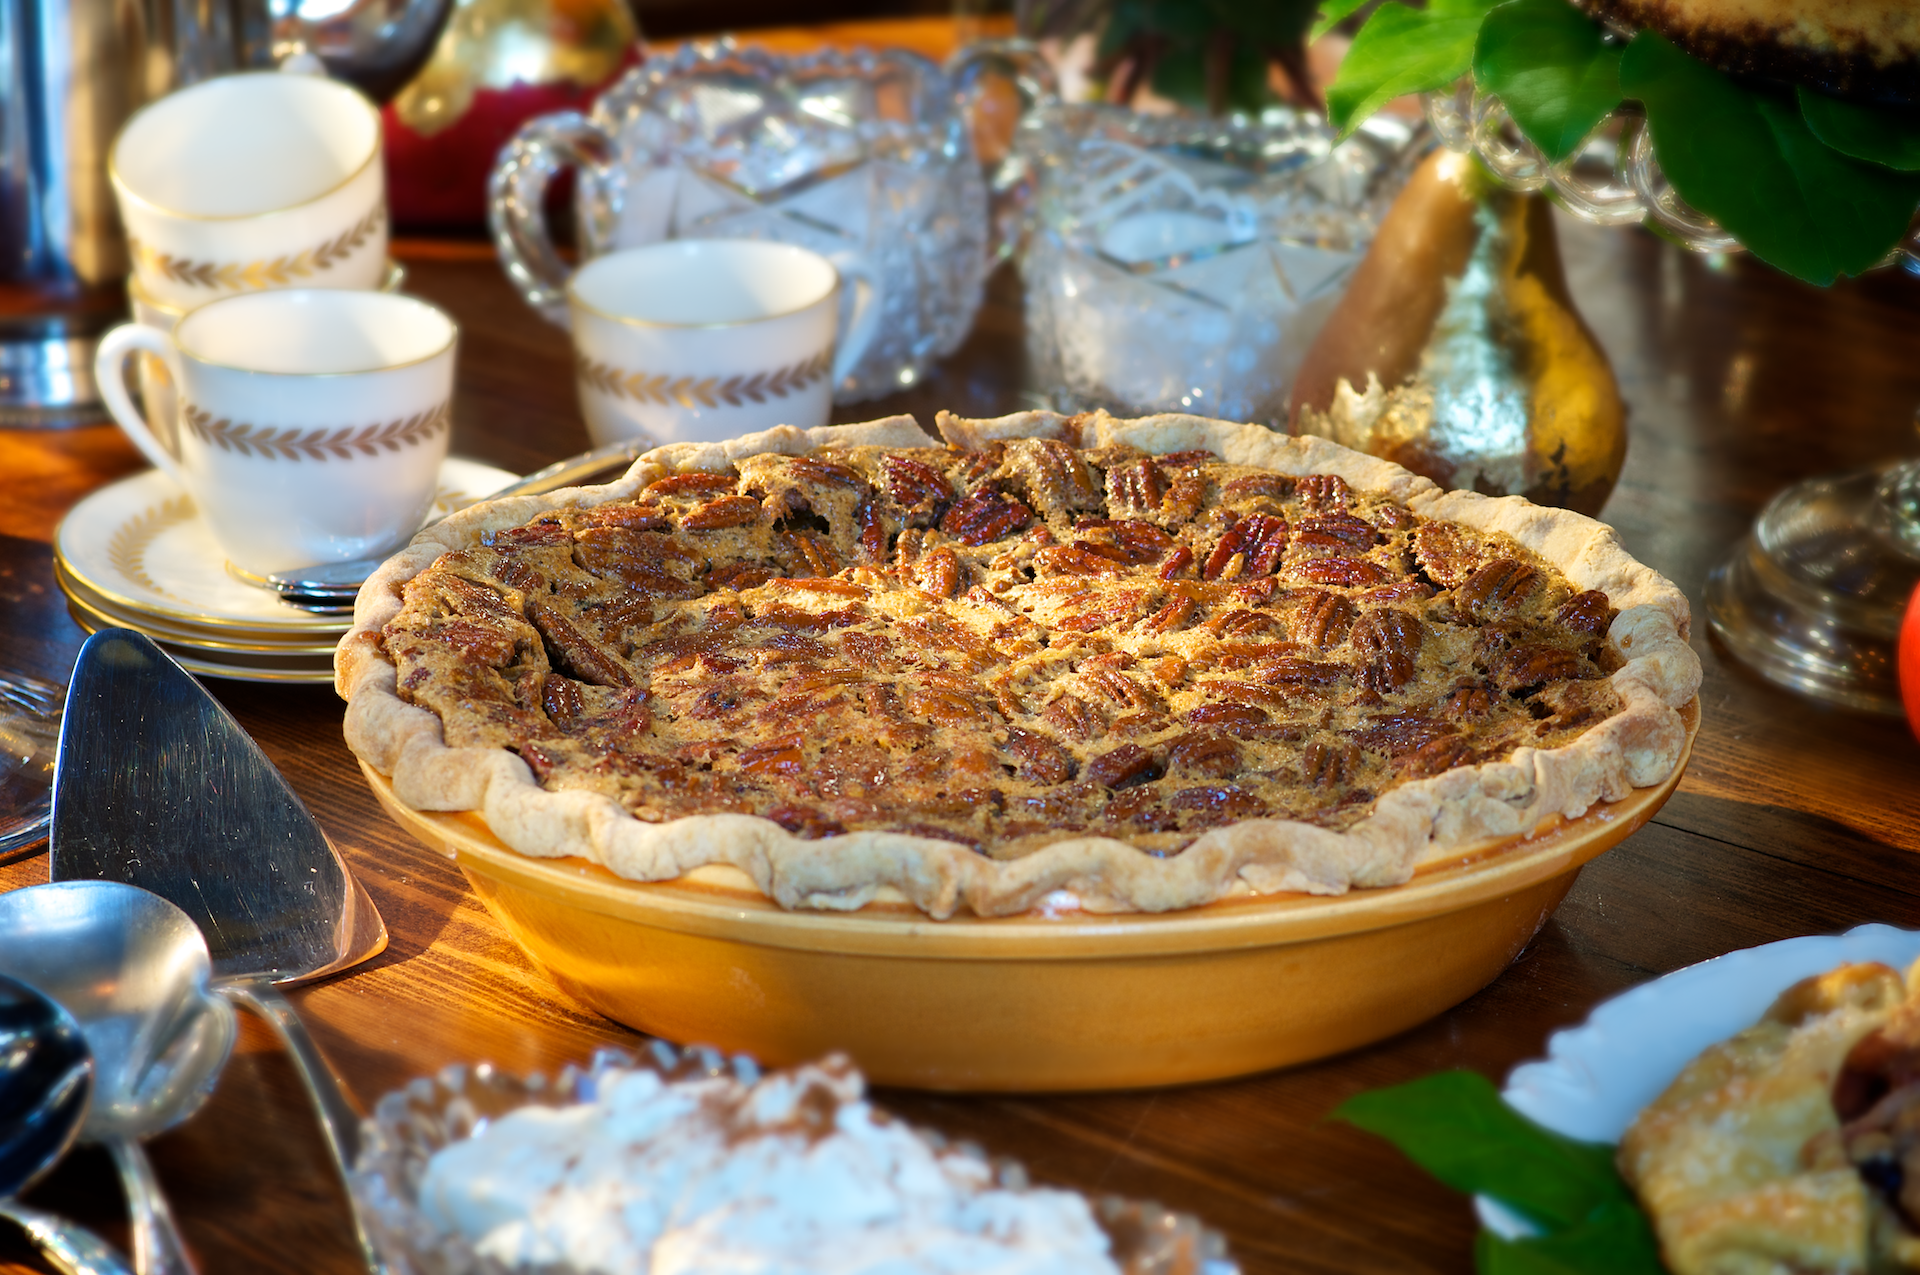 Silky-rich sweet potato pie topped with a layer of golden caramelized pecan pie, this authentic Southern pie offers a standout dessert for the holiday. Wonderful topped with a scoop of cinnamon ice cream or a dollop of whipped cream